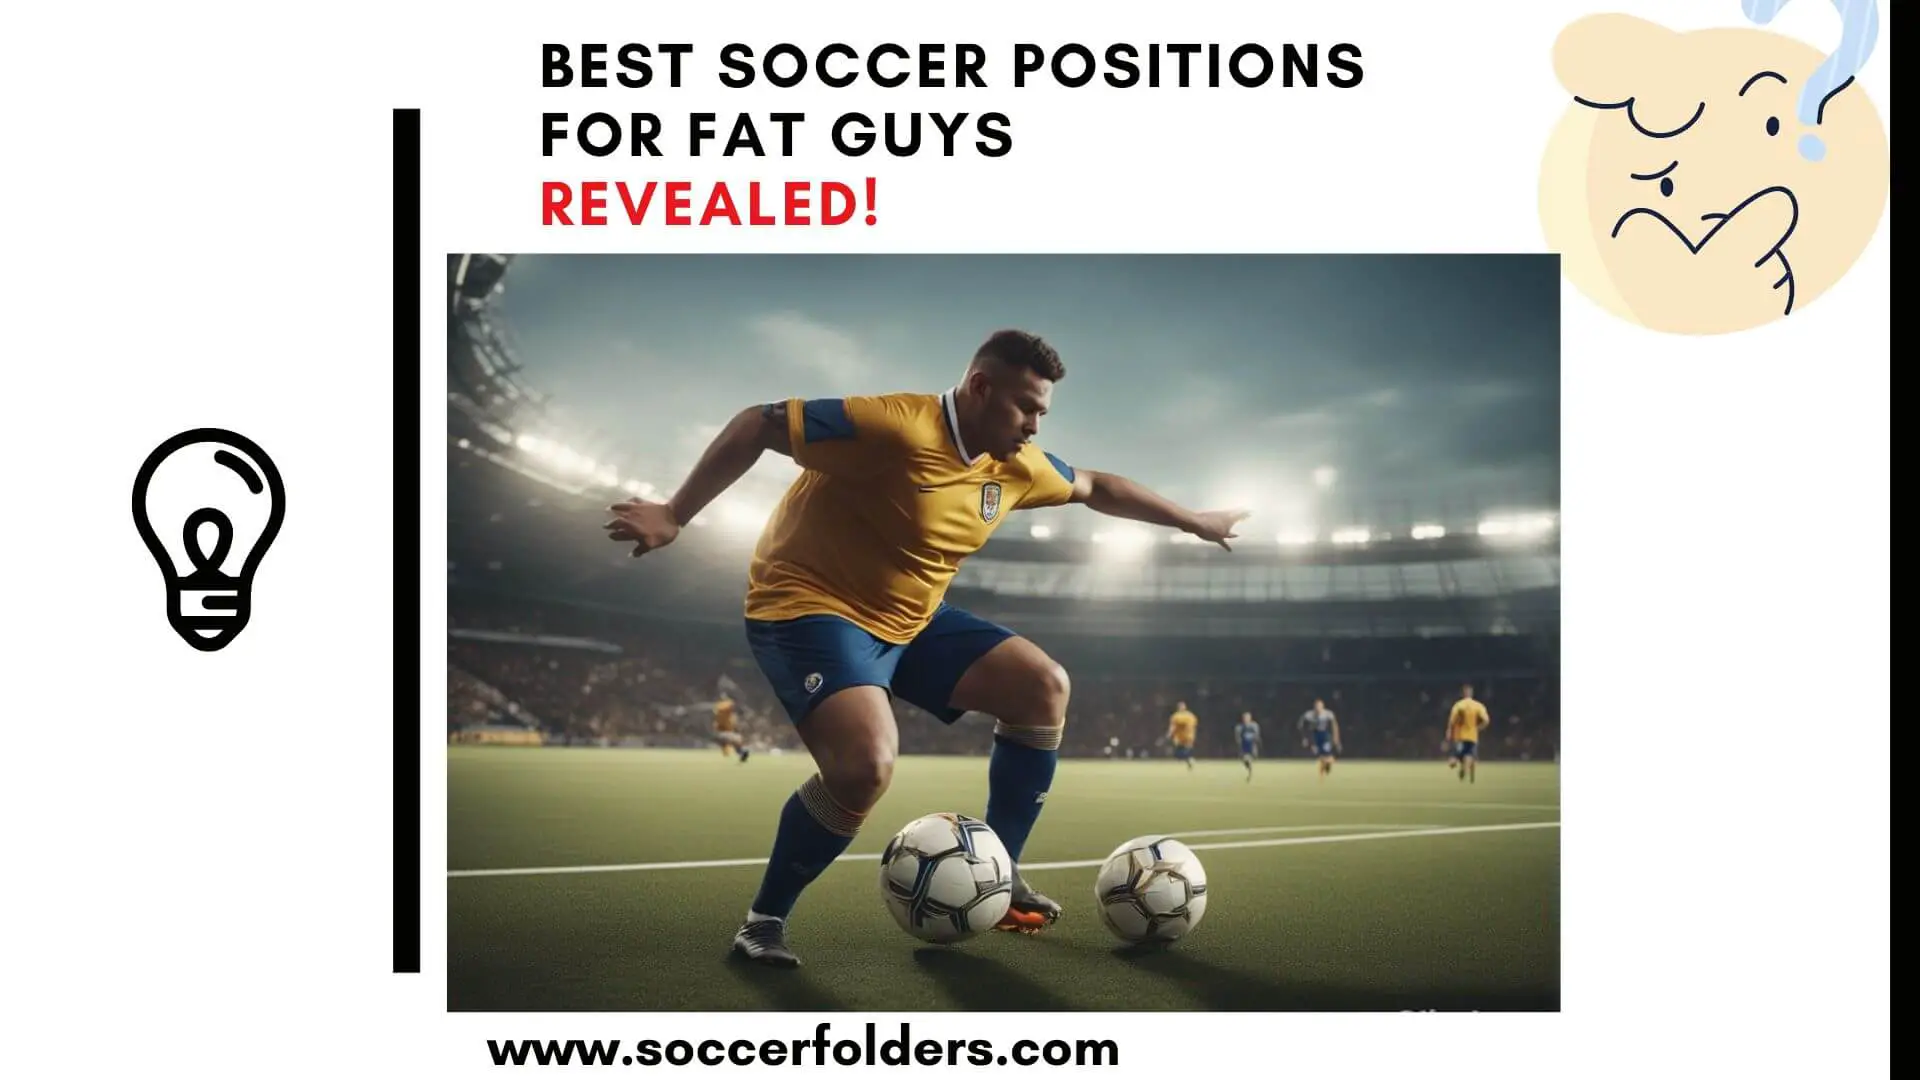 Best soccer positions for fat guys - Featured image